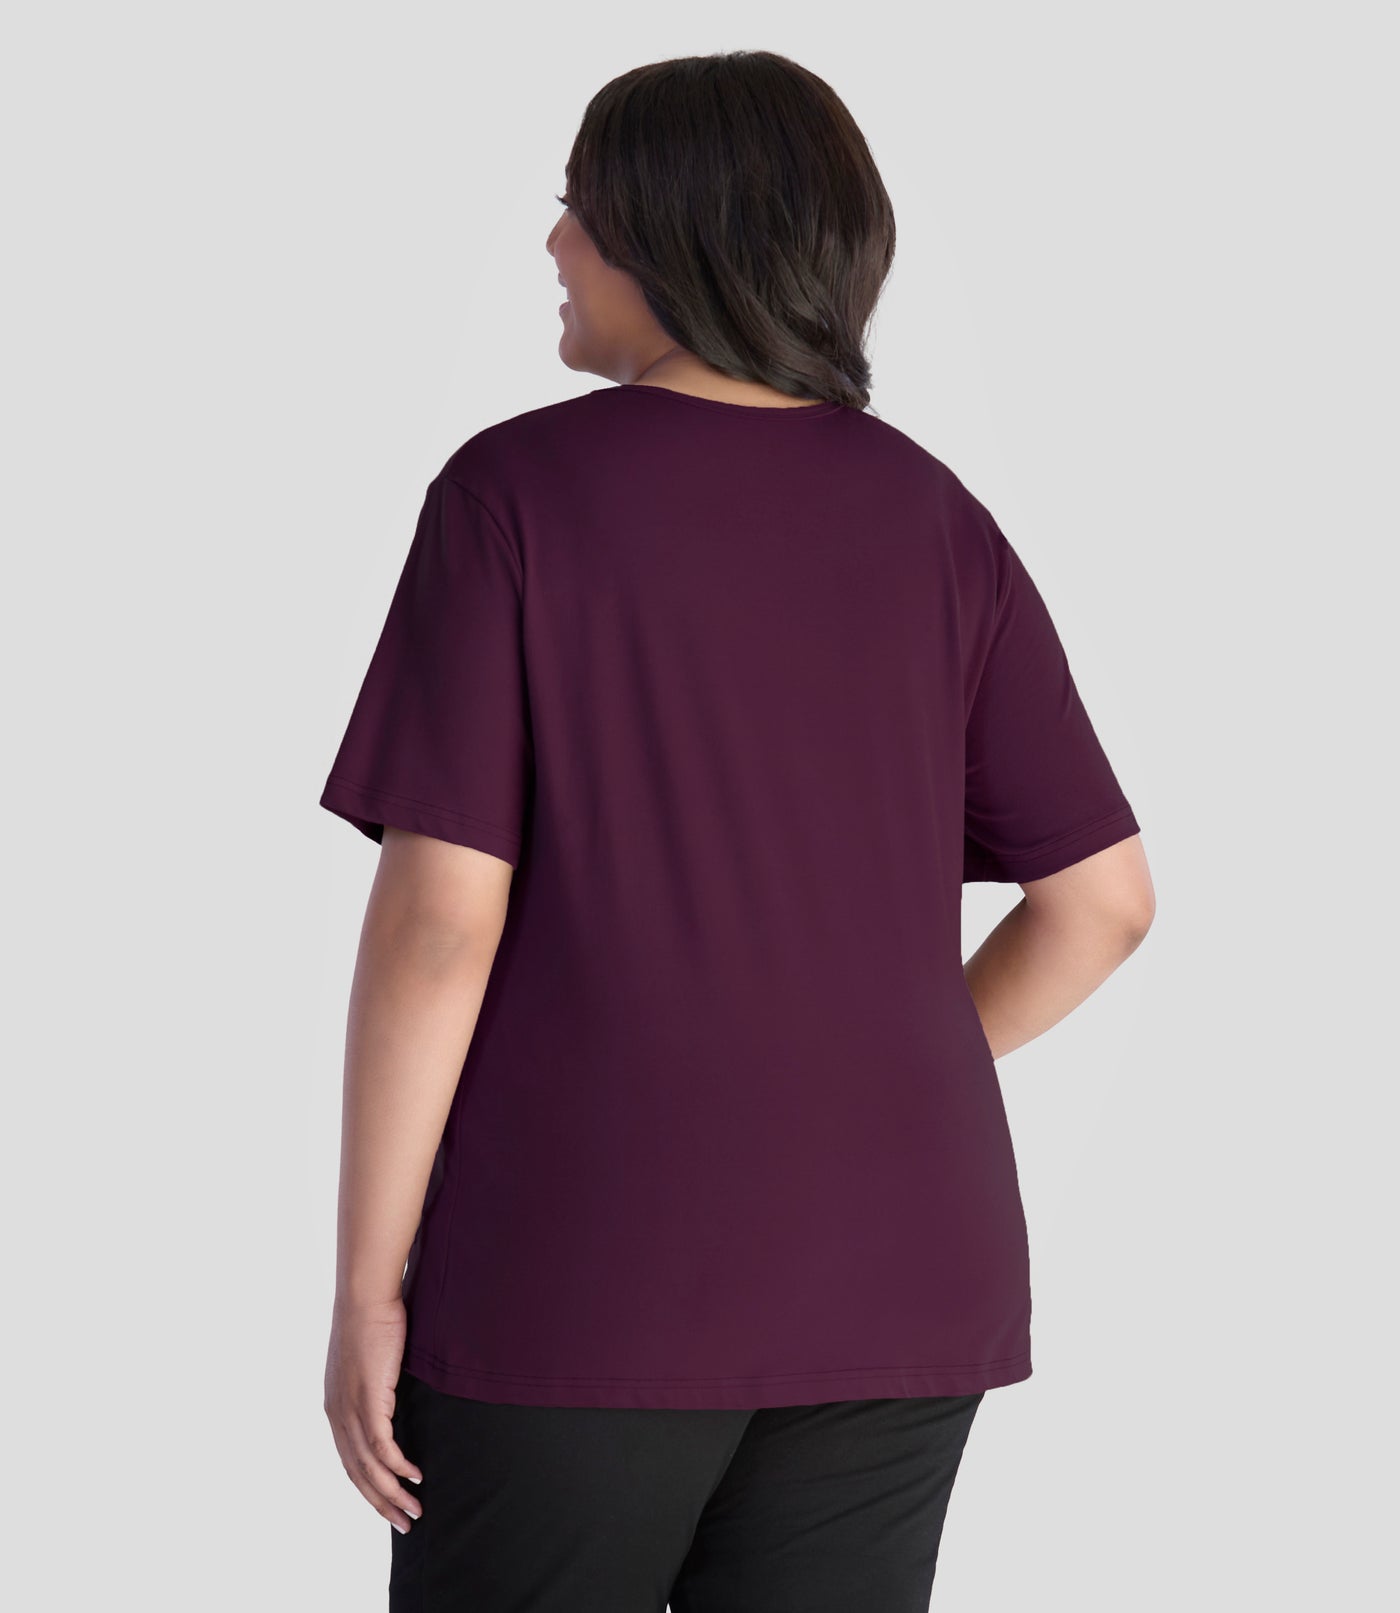 JunoActive model wearing EasyLuxe Classics V-Neck Plus Size Top in color wine. Model is facing back with her left arm by her side and right hand on hip.